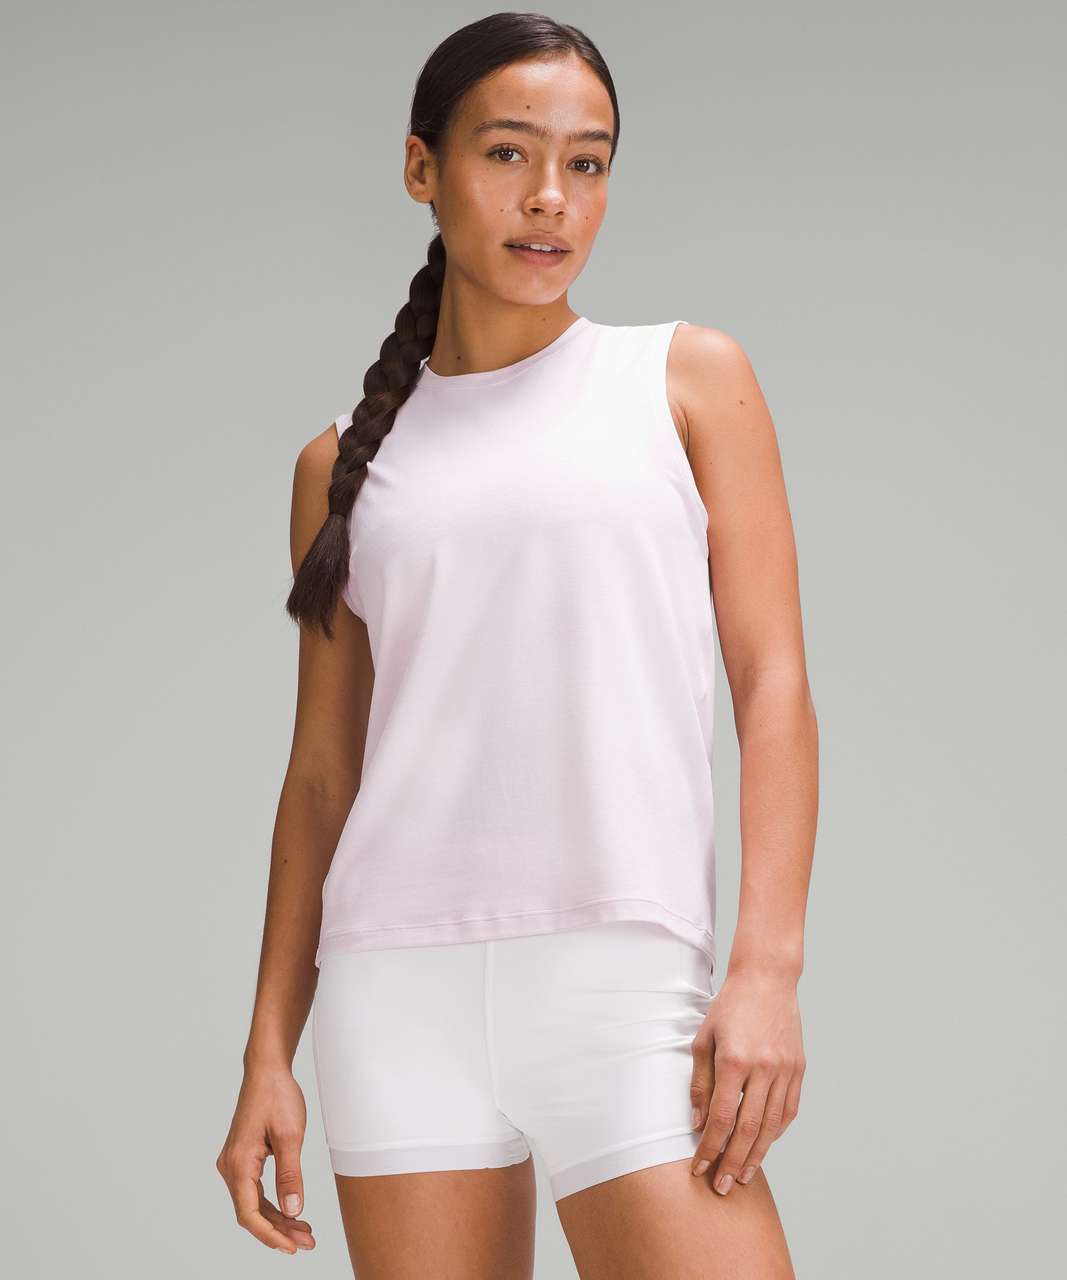 Lululemon License to Train Classic-Fit Tank Top - Heathered Meadowsweet Pink